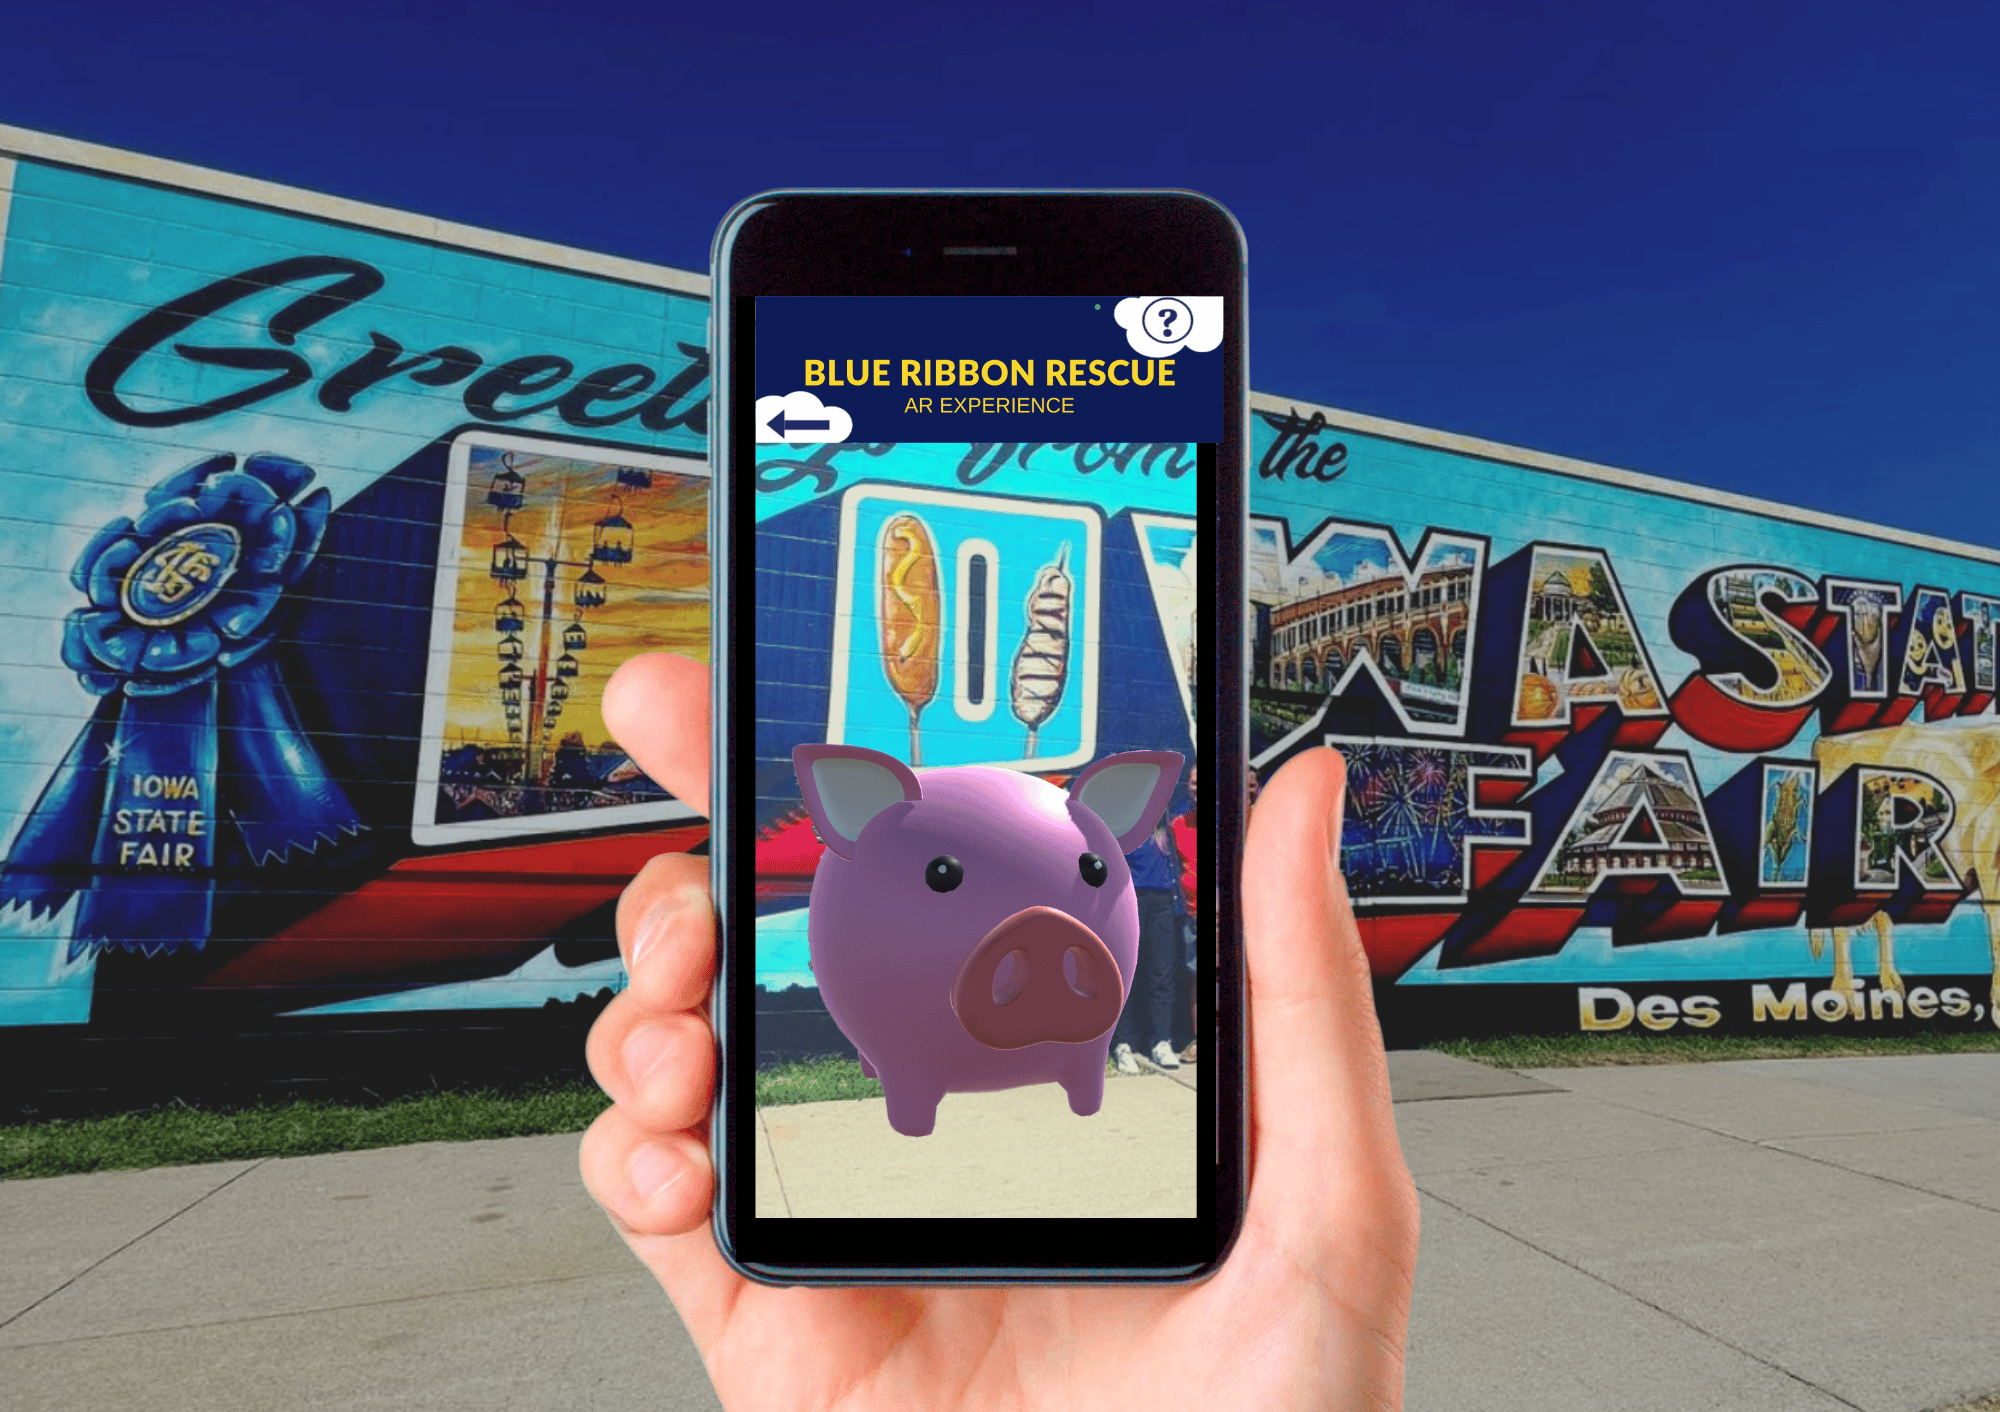 app displayed with a pig at Iowa State Fair